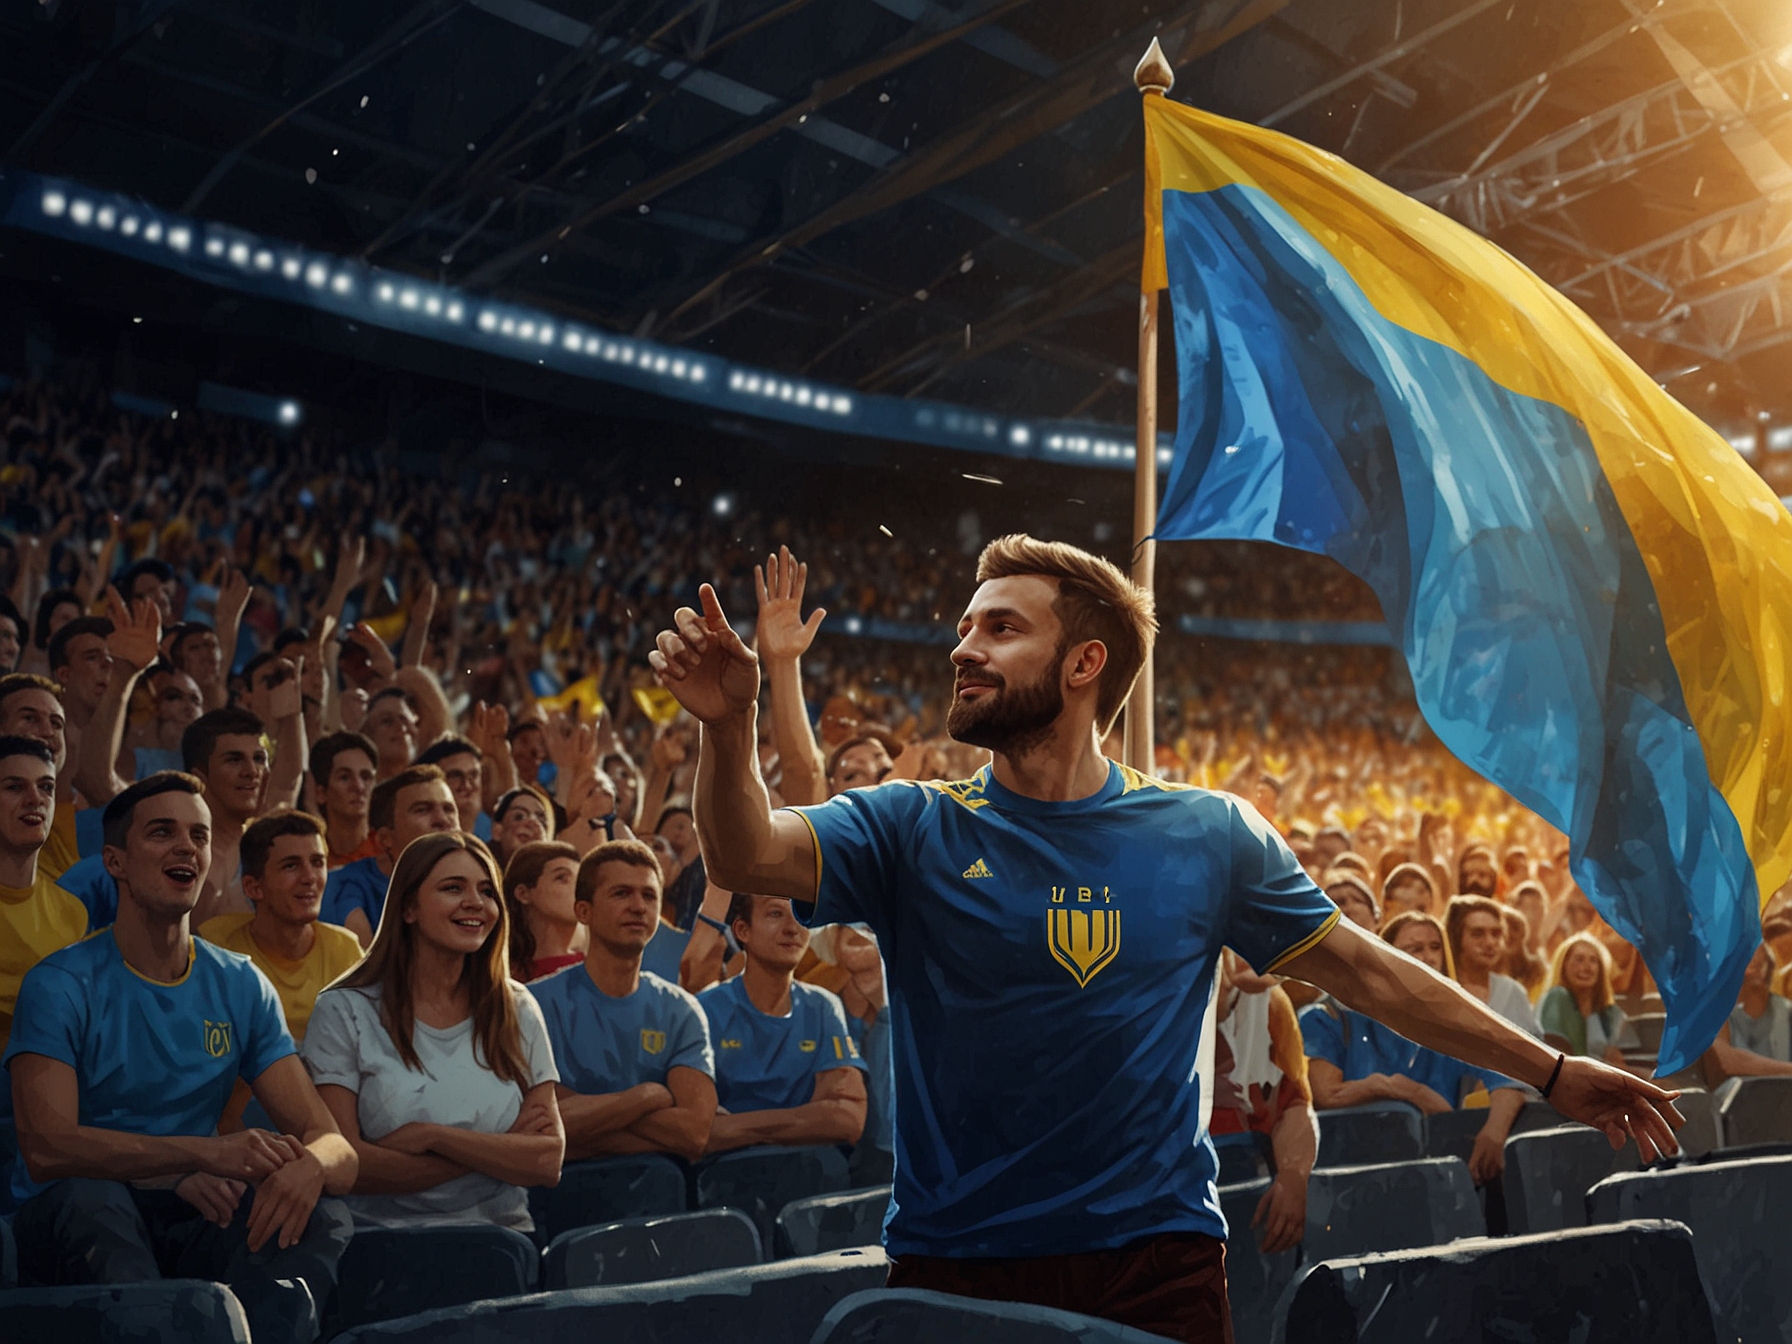 Fans inside the stadium waving Ukrainian flags and showing support for their team, reflecting the atmosphere UEFA aims to maintain free of geopolitical conflicts.